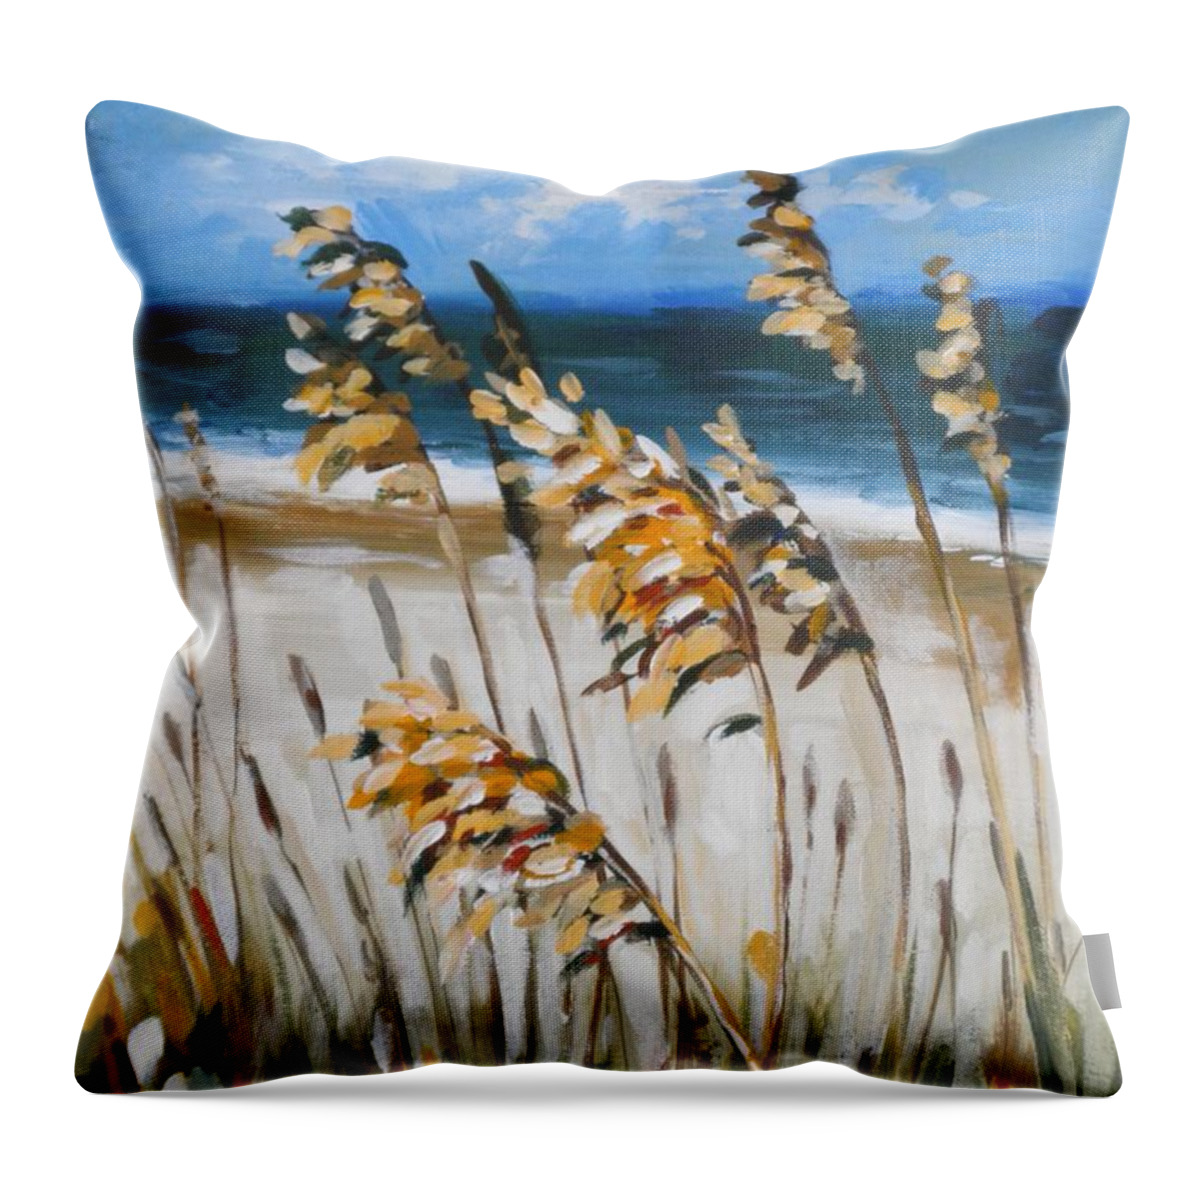 Landscape Throw Pillow featuring the painting Beach Grass by Outre Art Natalie Eisen